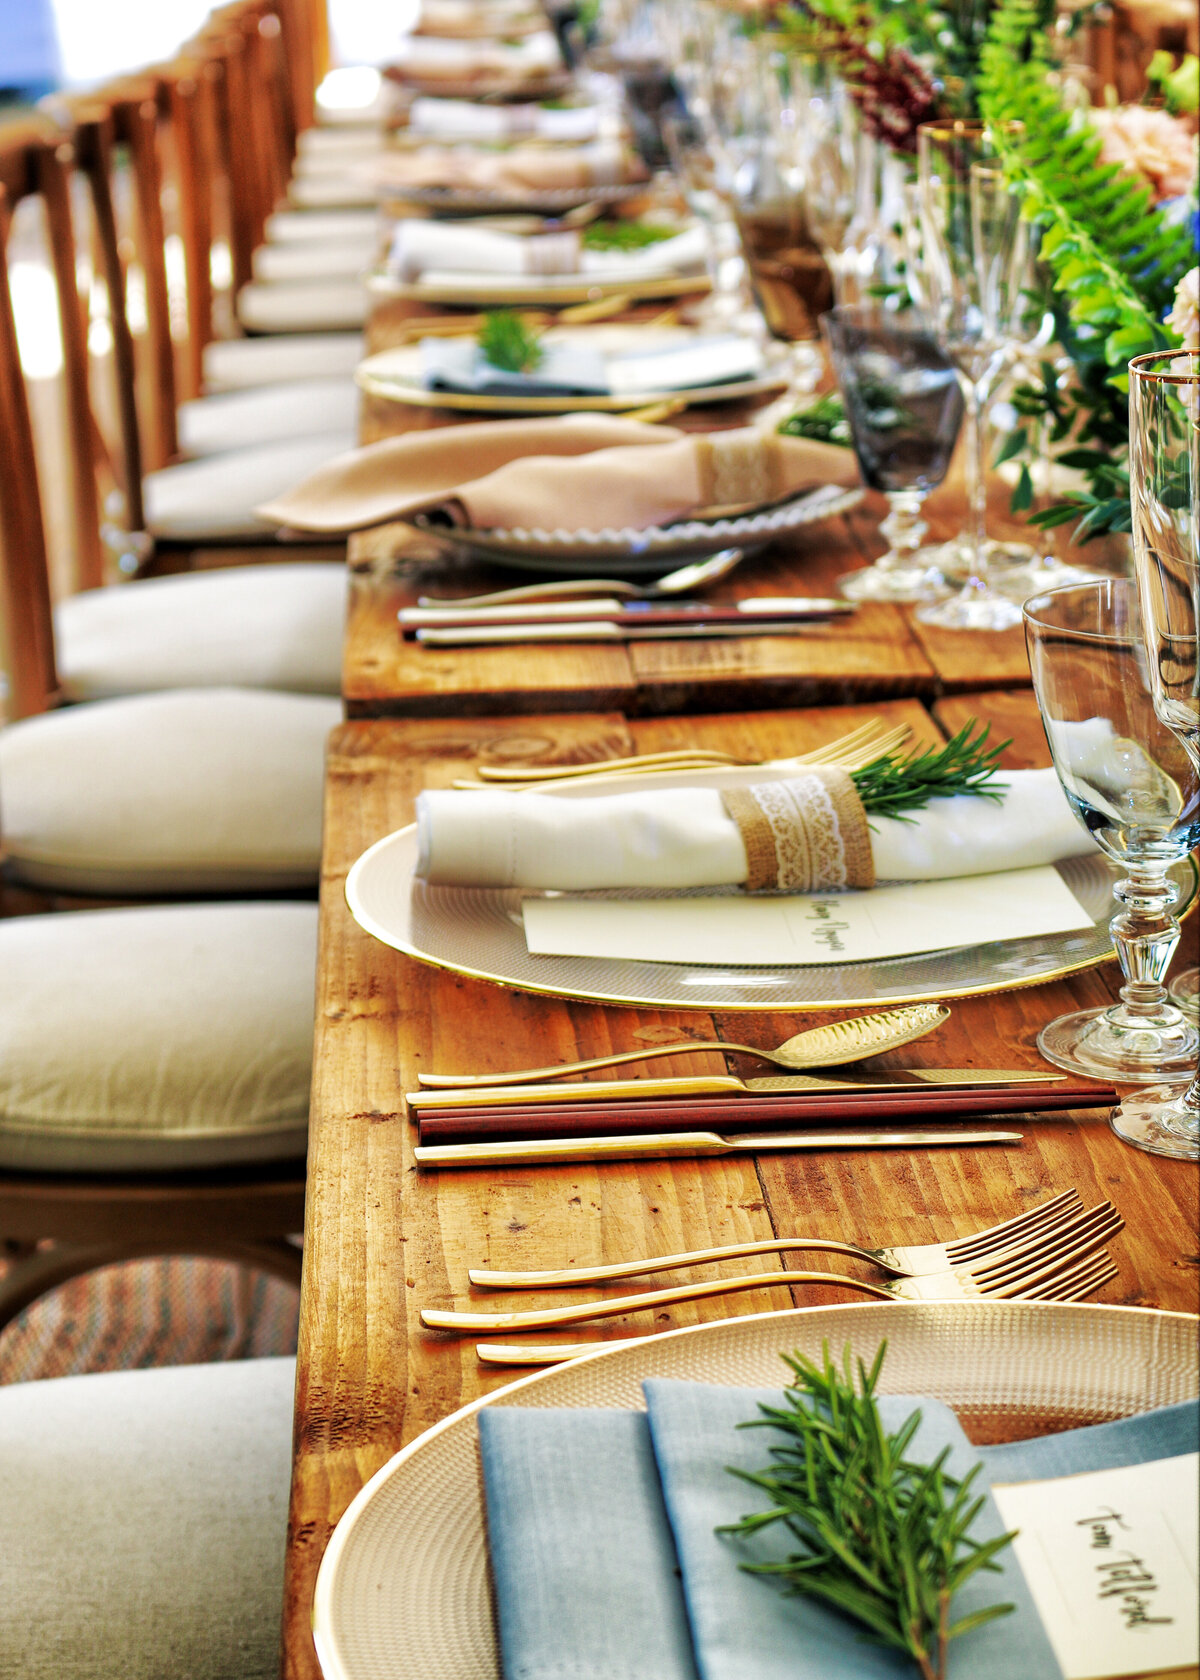 A rustic wooden table is laid for a wedding dinner or party with greenery creating a simple event decor.